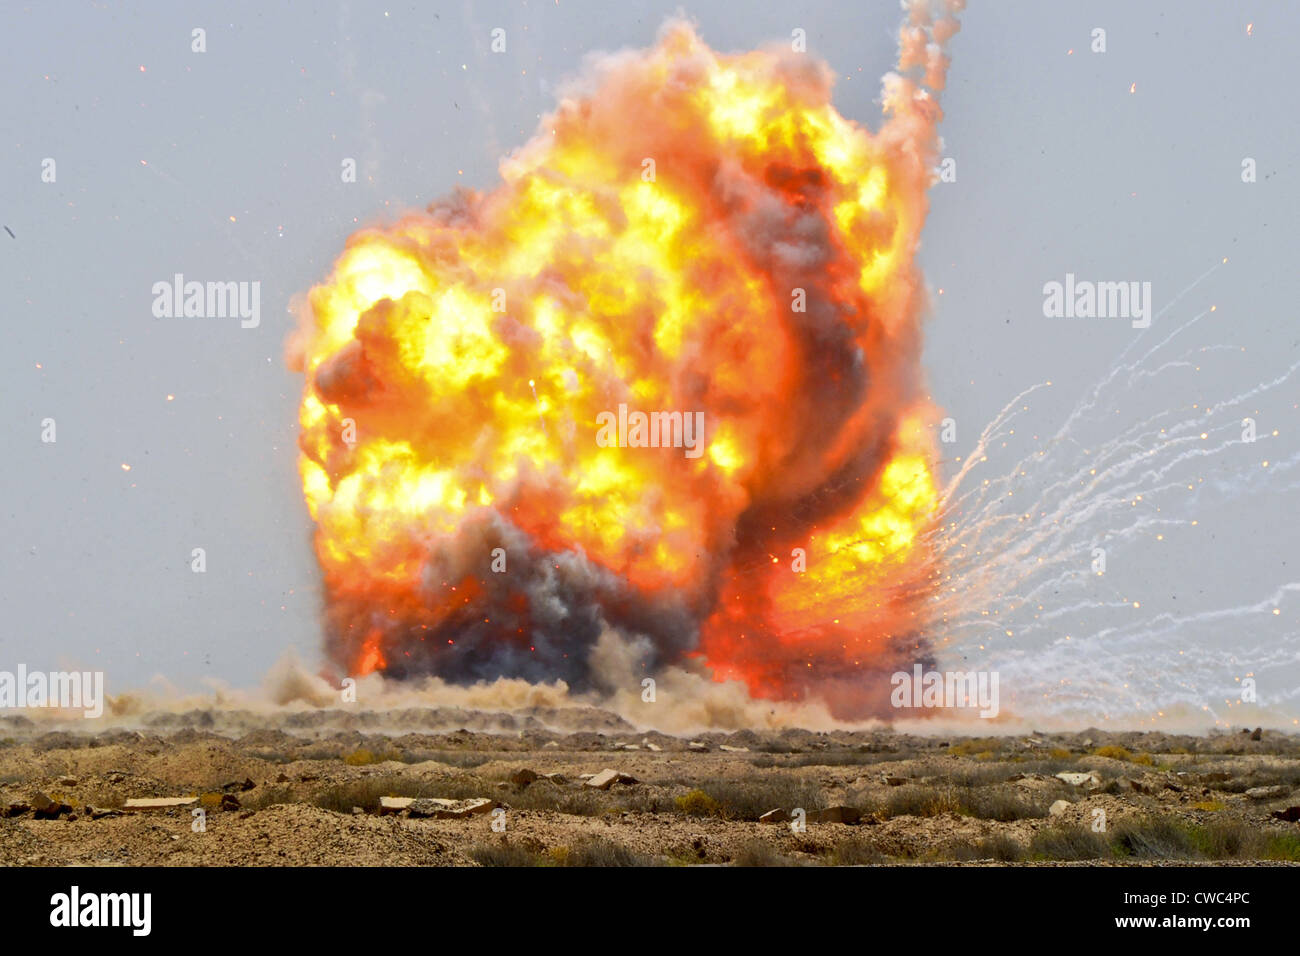 A controlled detonation of captured explosives set off by US and Iraqi soldiers outside Bassami Iraq July 13 2010. Stock Photo